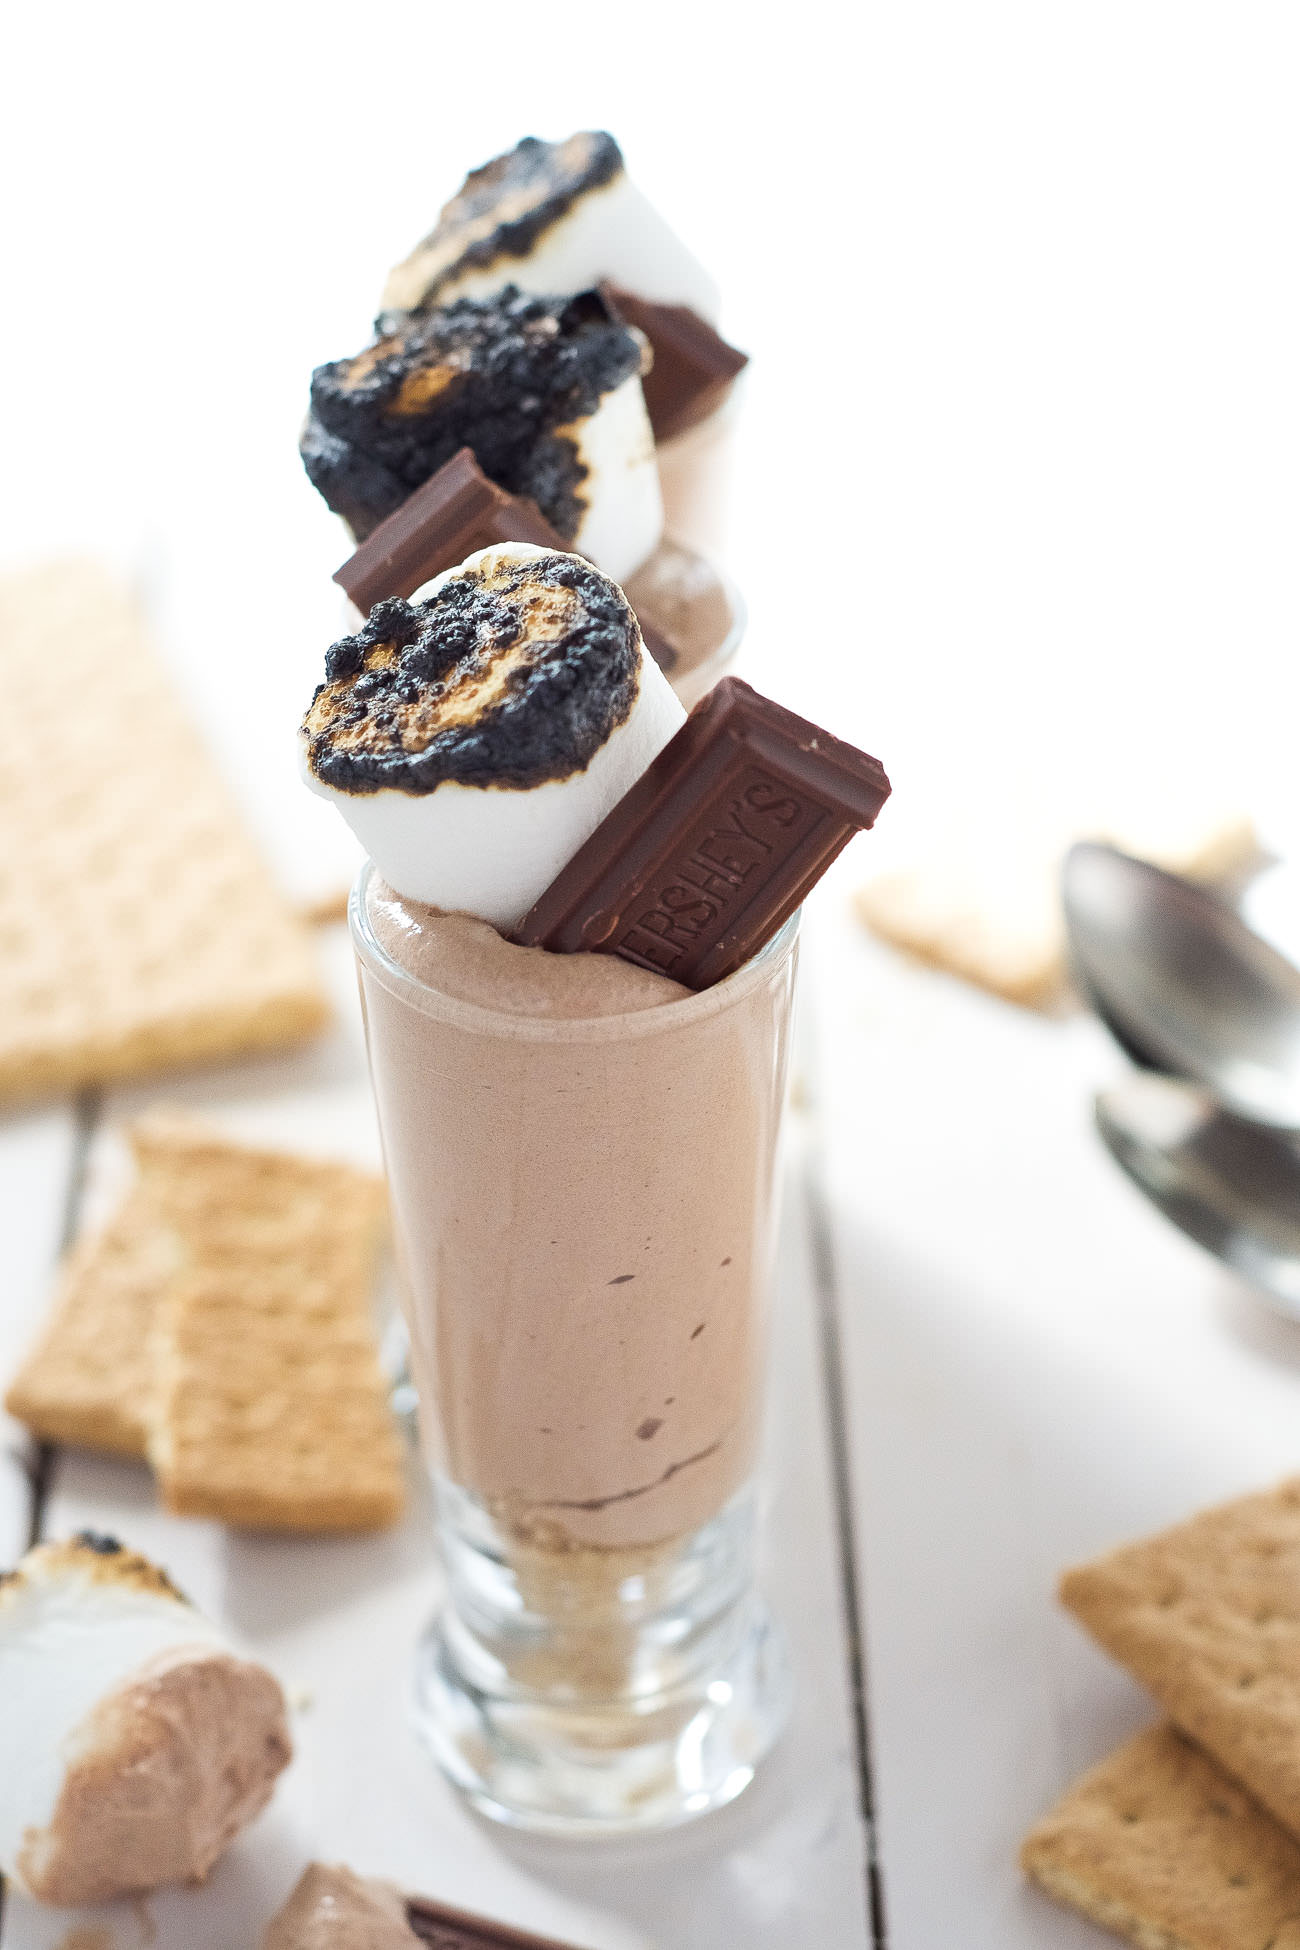 You will fall in love with this No Bake smores cheesecake! They are a simple dessert that is filled chocolate cheesecake, graham crackers and topped with a toasted marshmallow! A dessert you will have no idea is under 150 calories!